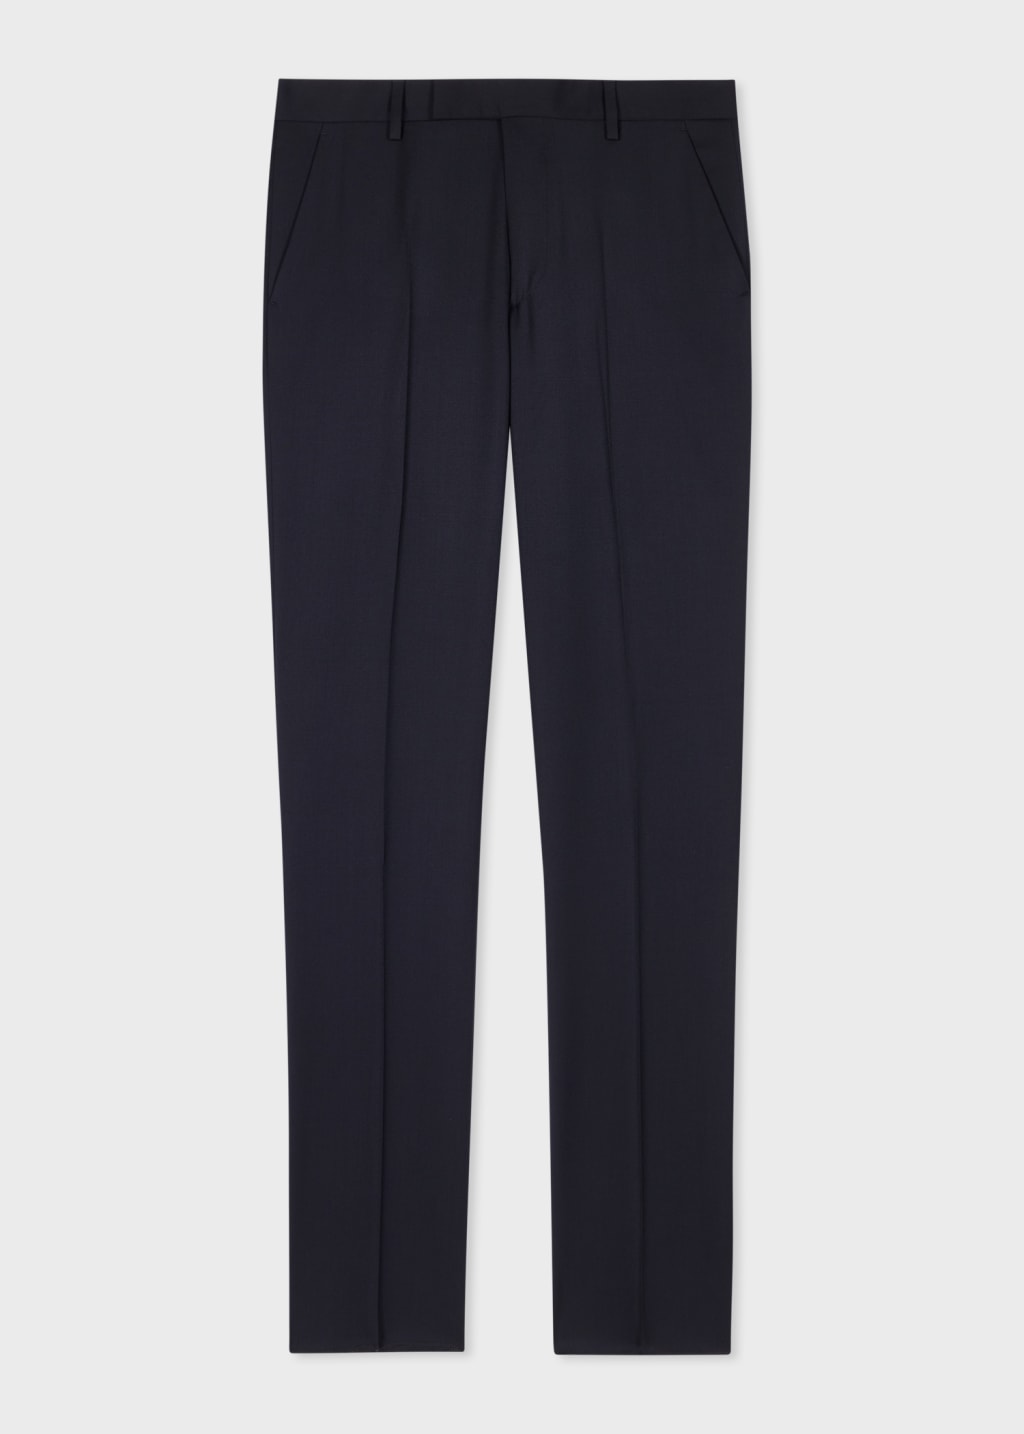 Front View - Tailored-Fit Navy Wool Twill Two-Button Suit Paul Smith